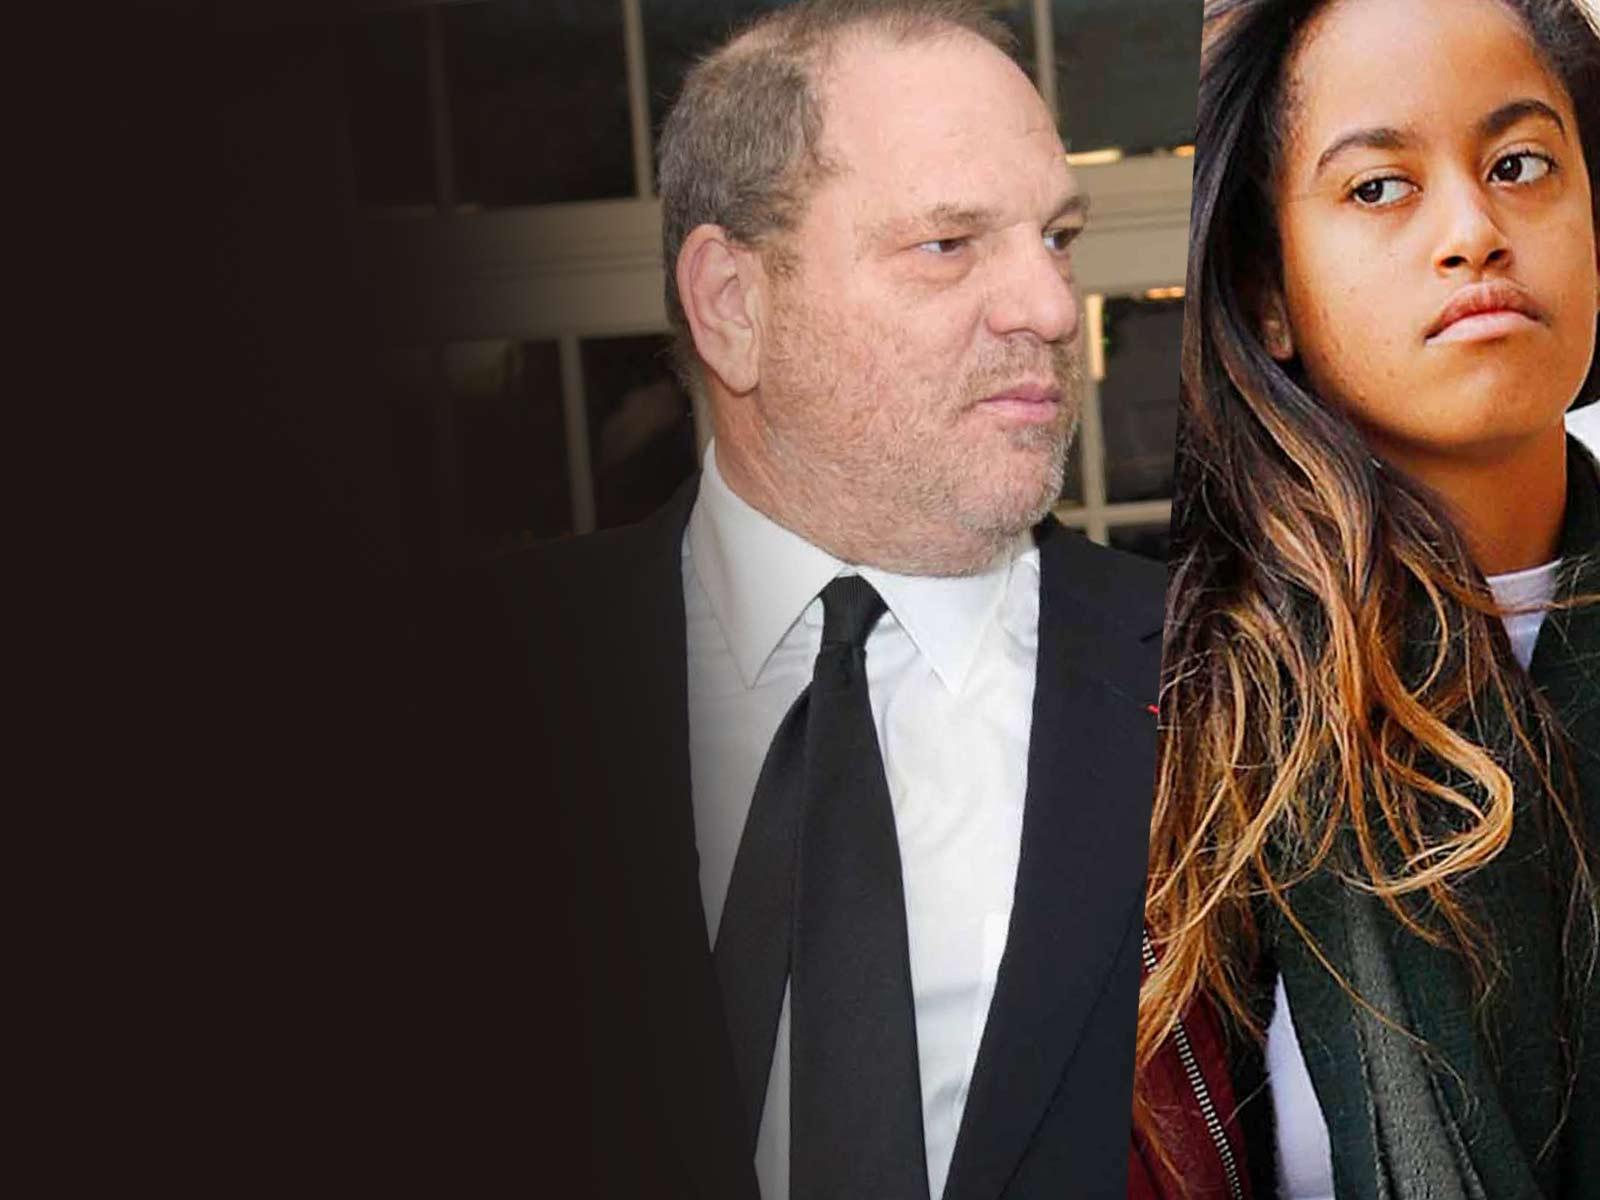 Malia Obama May Be Dragged into Harvey Weinstein Debacle for Deposition